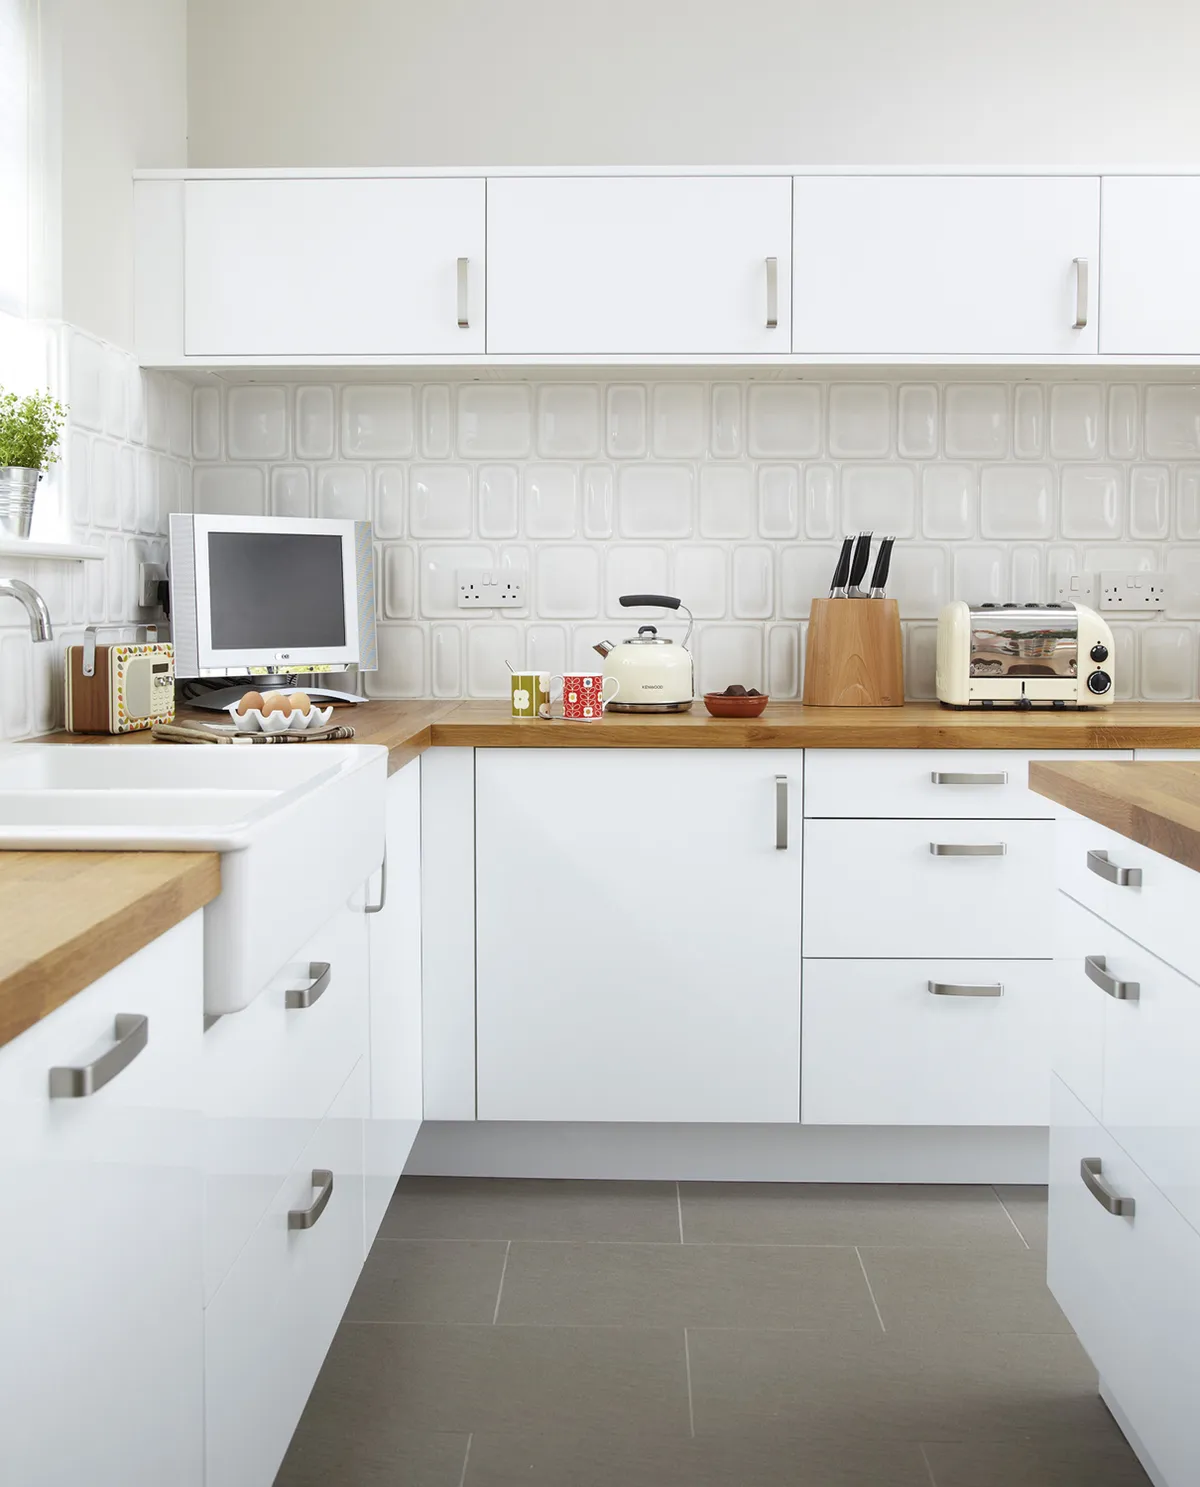 As the previous room felt so dingy, Julie made sure her extension was fresh and bright, with white cabinets and chrome finishes. The units were great value, allowing plenty of storage space for her money